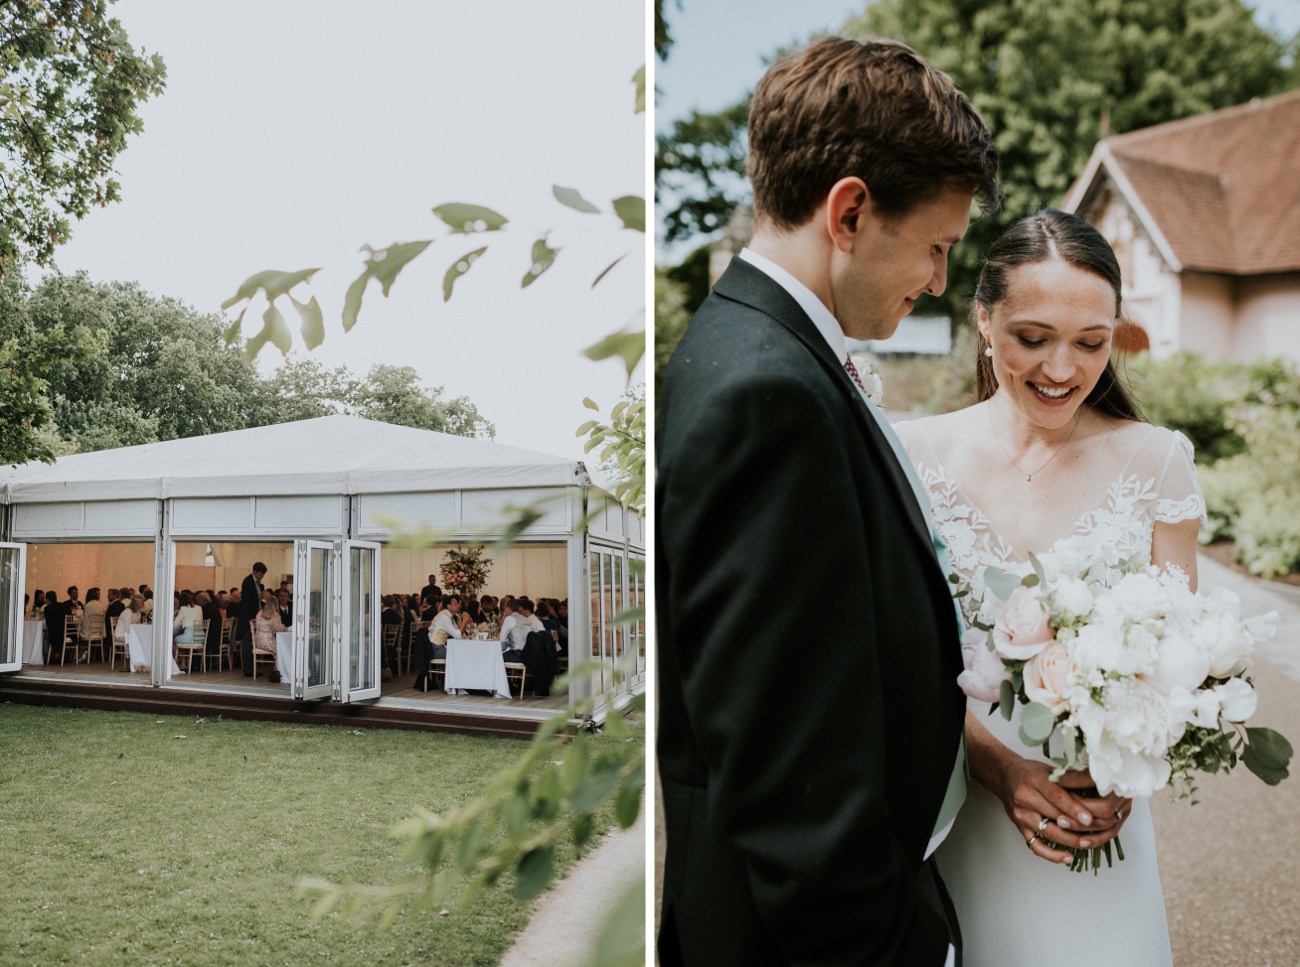 Fulham Palace wedding marquee, beautiful florals in the gardens outside in the sunshine